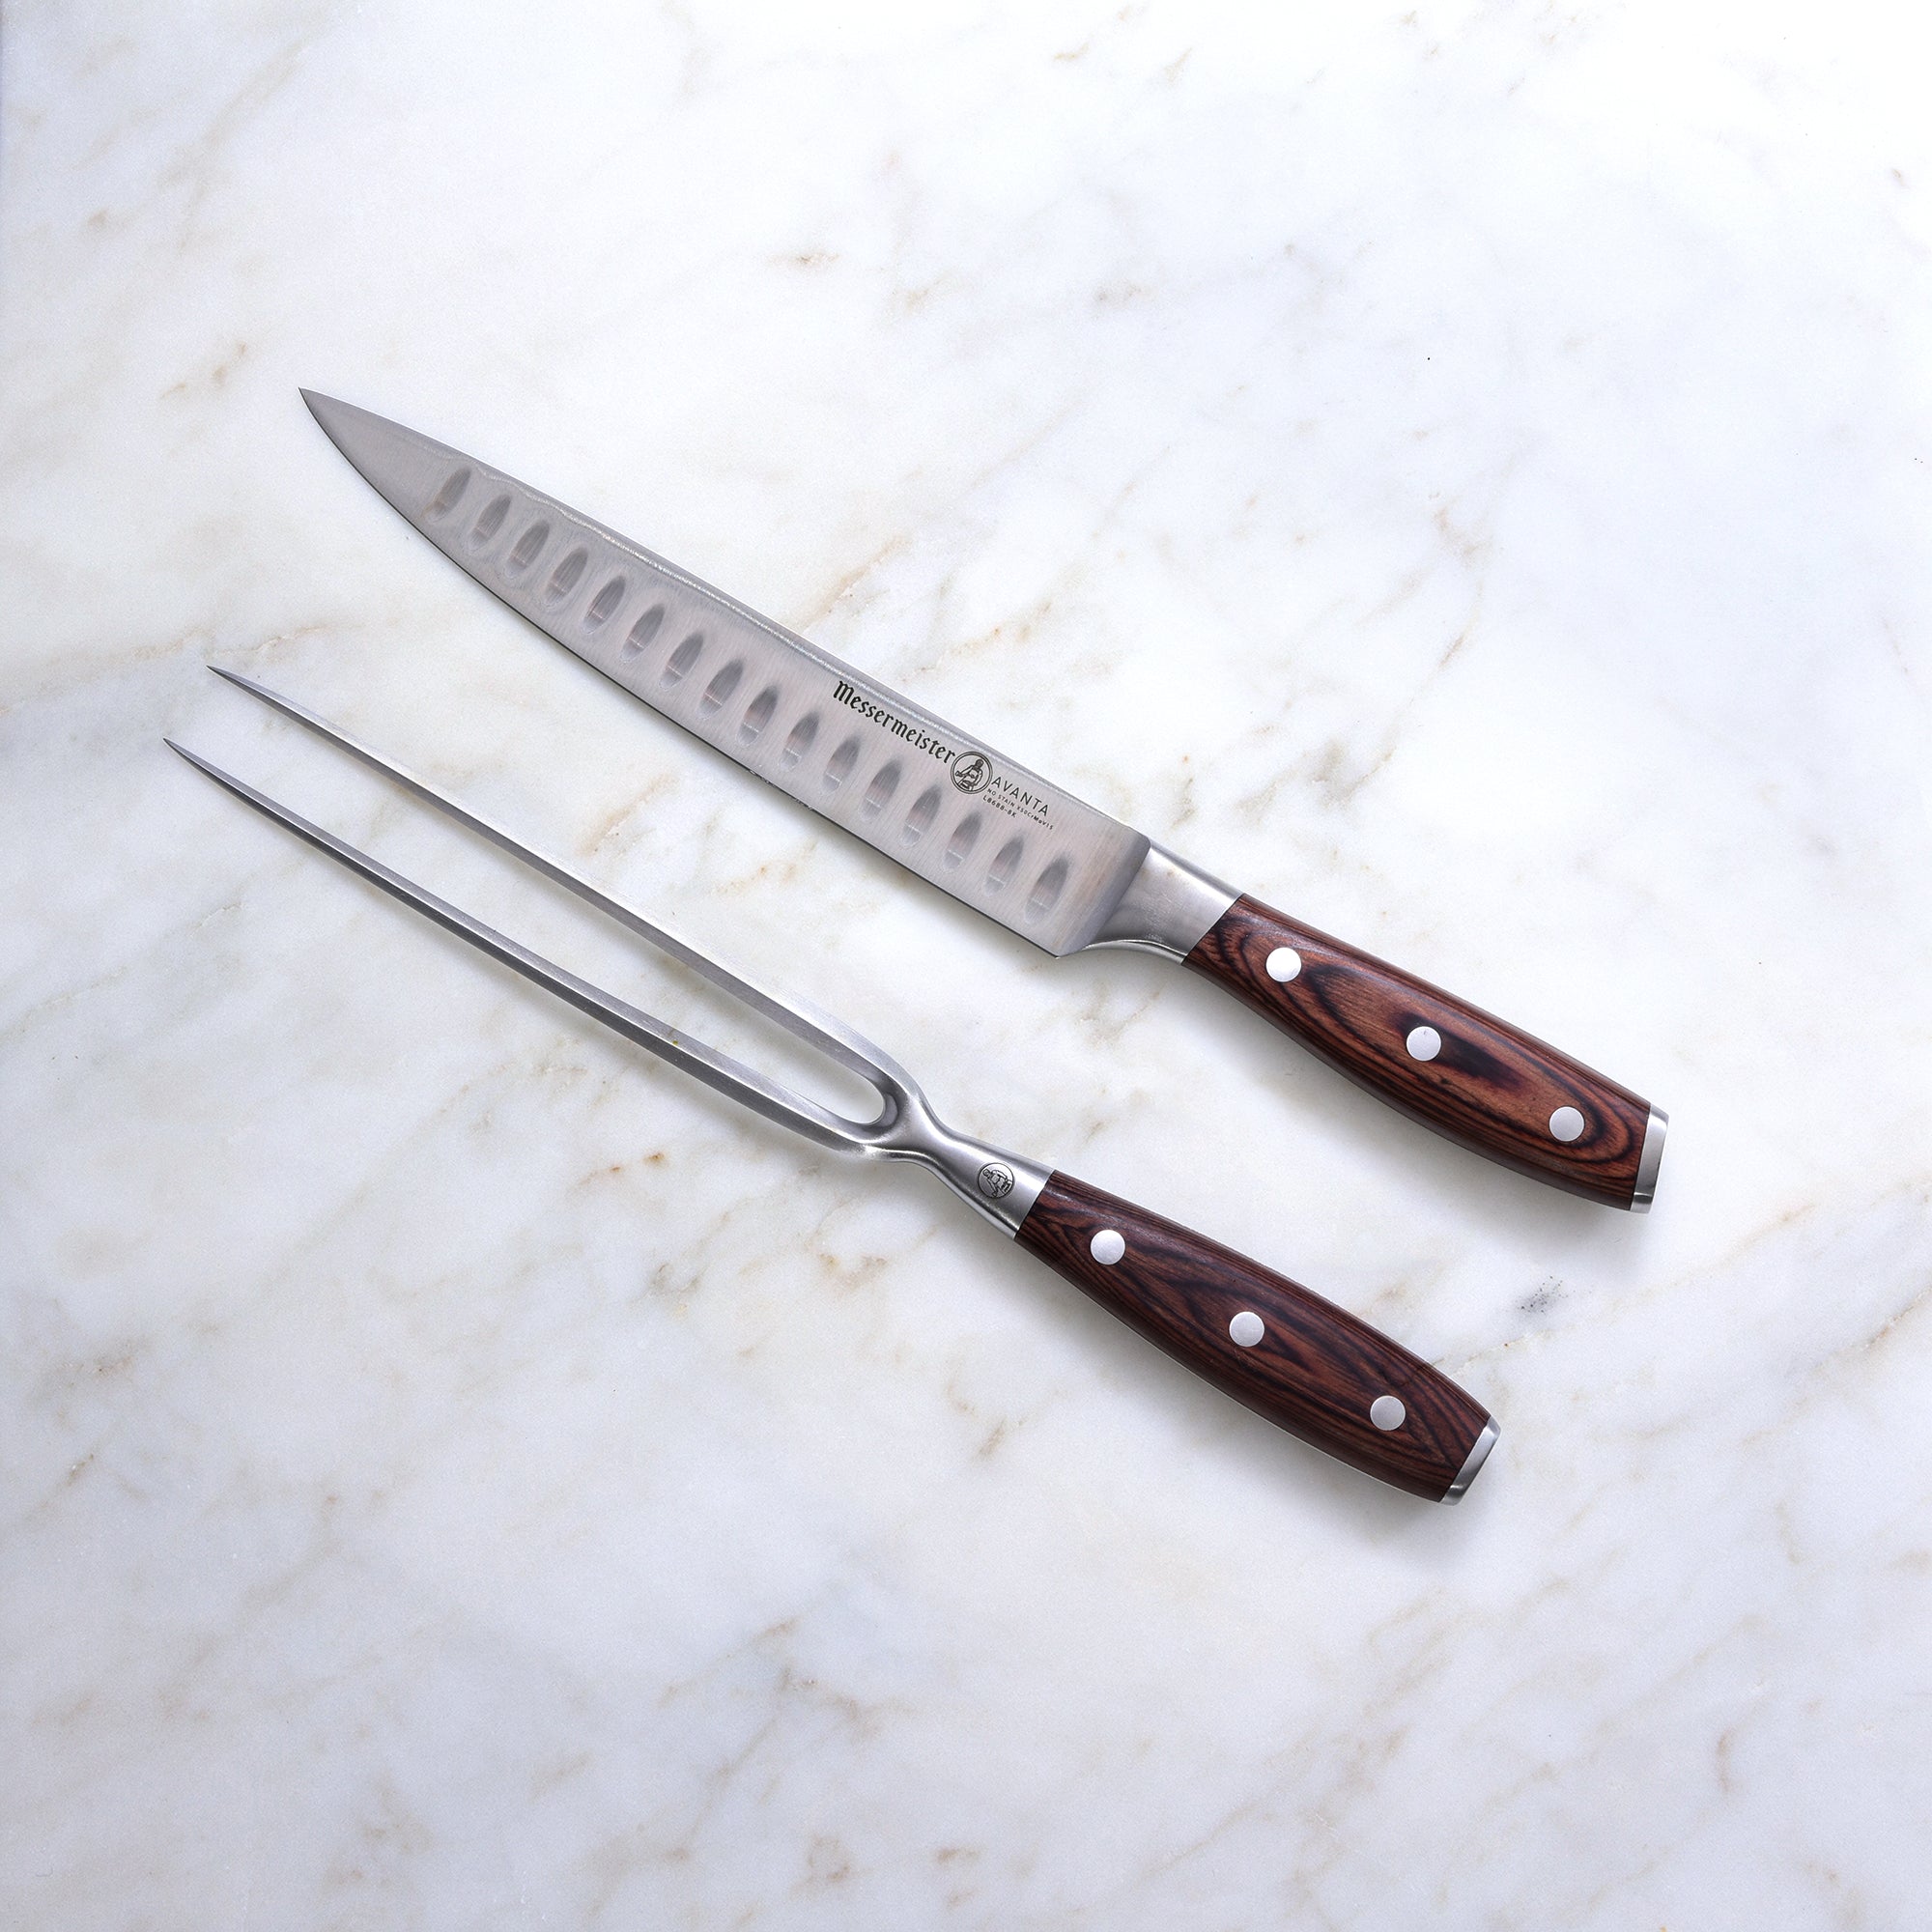 Carving knife - New model (equipped with 5 blades + whetstone) delivered  with imported saw